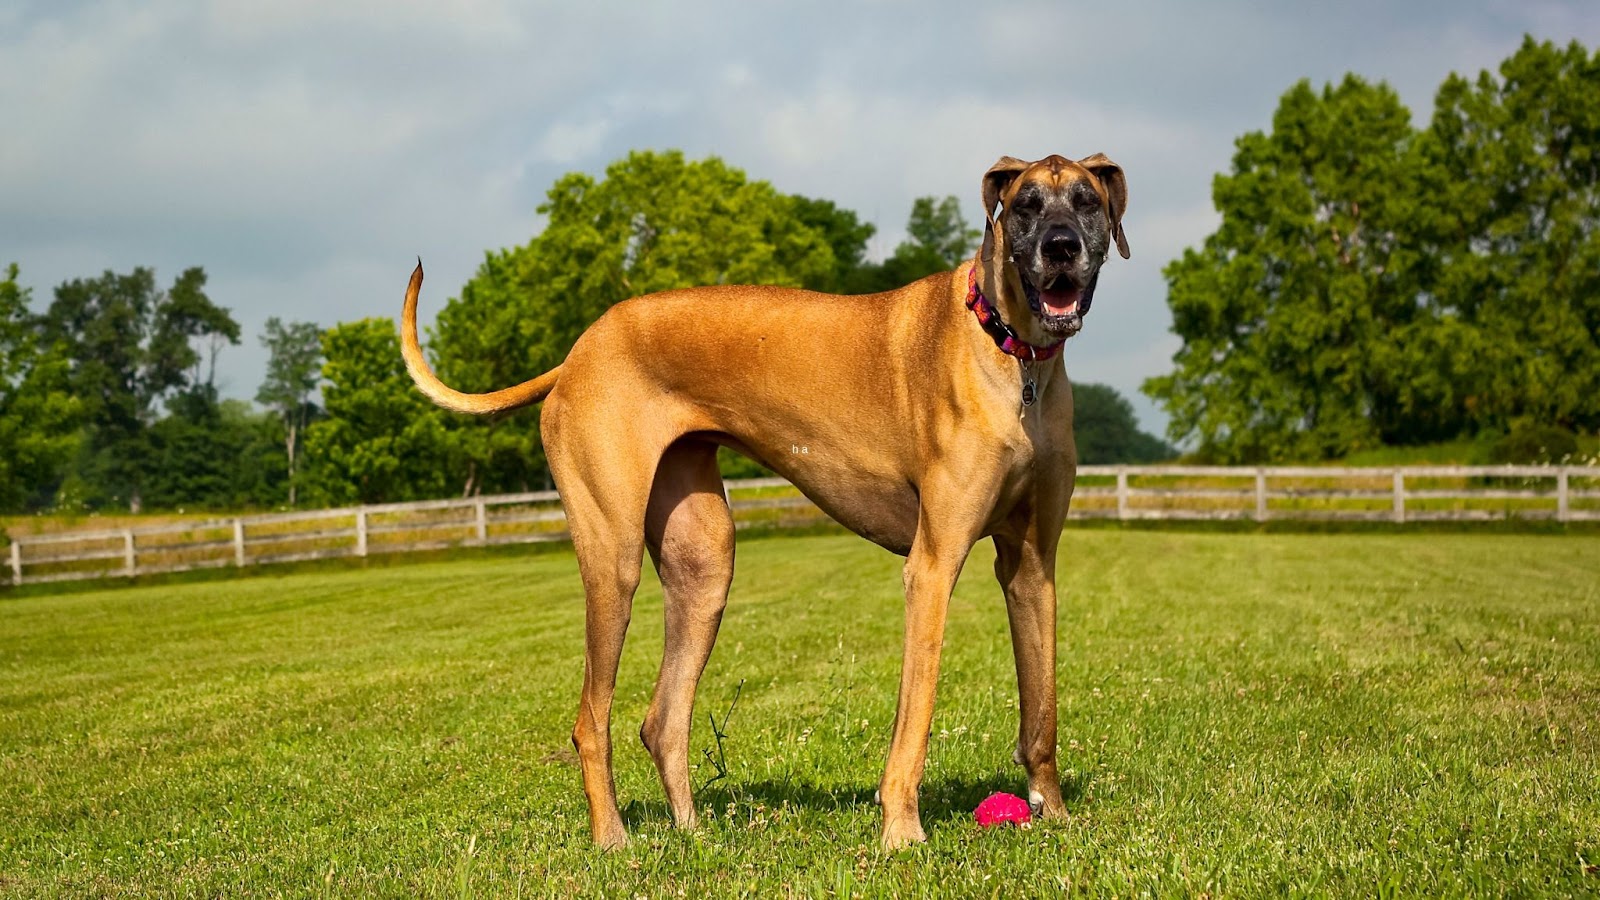 Beautiful tall giant fawn Great Dane standing in park